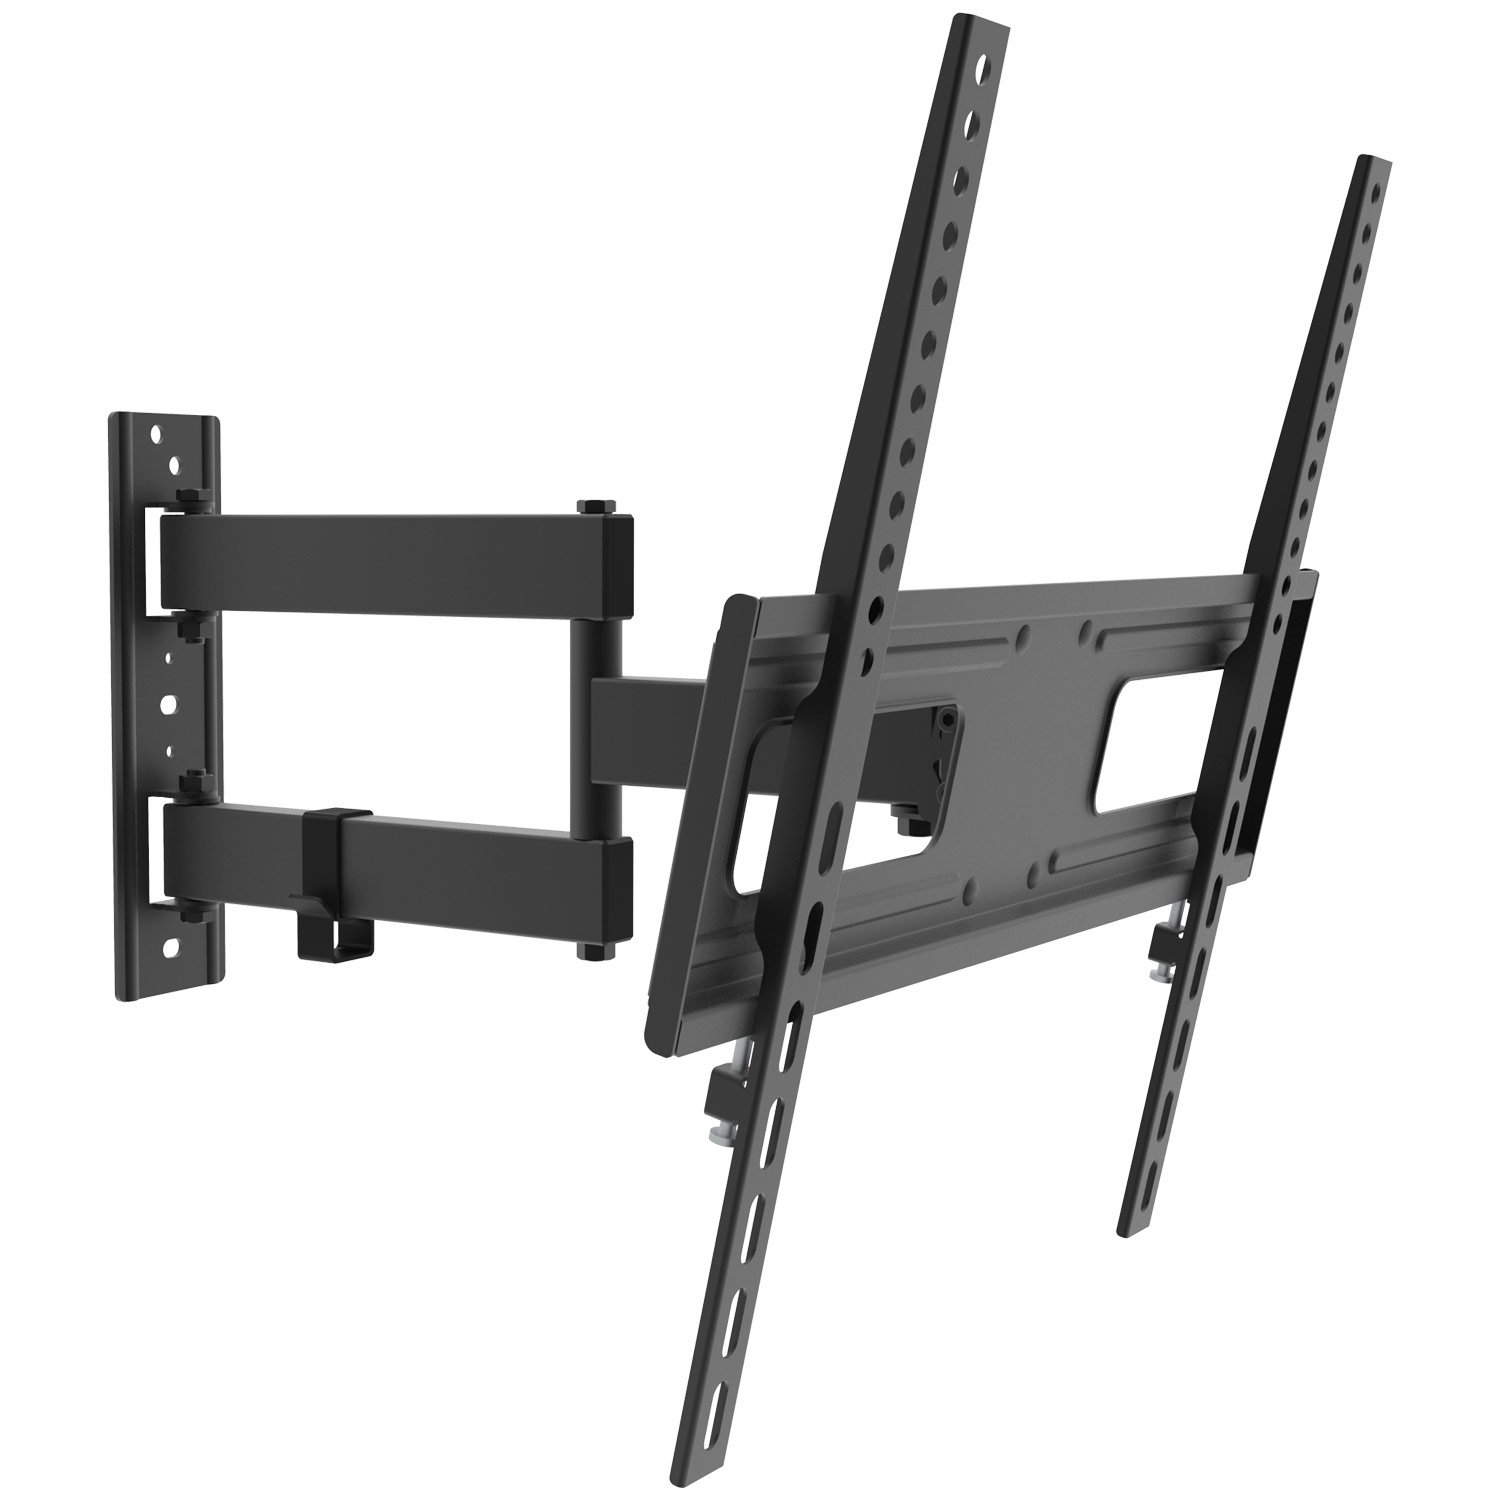 26-50 inch Full Motion Swivel TV Wall Mount Bracket - Click Image to Close